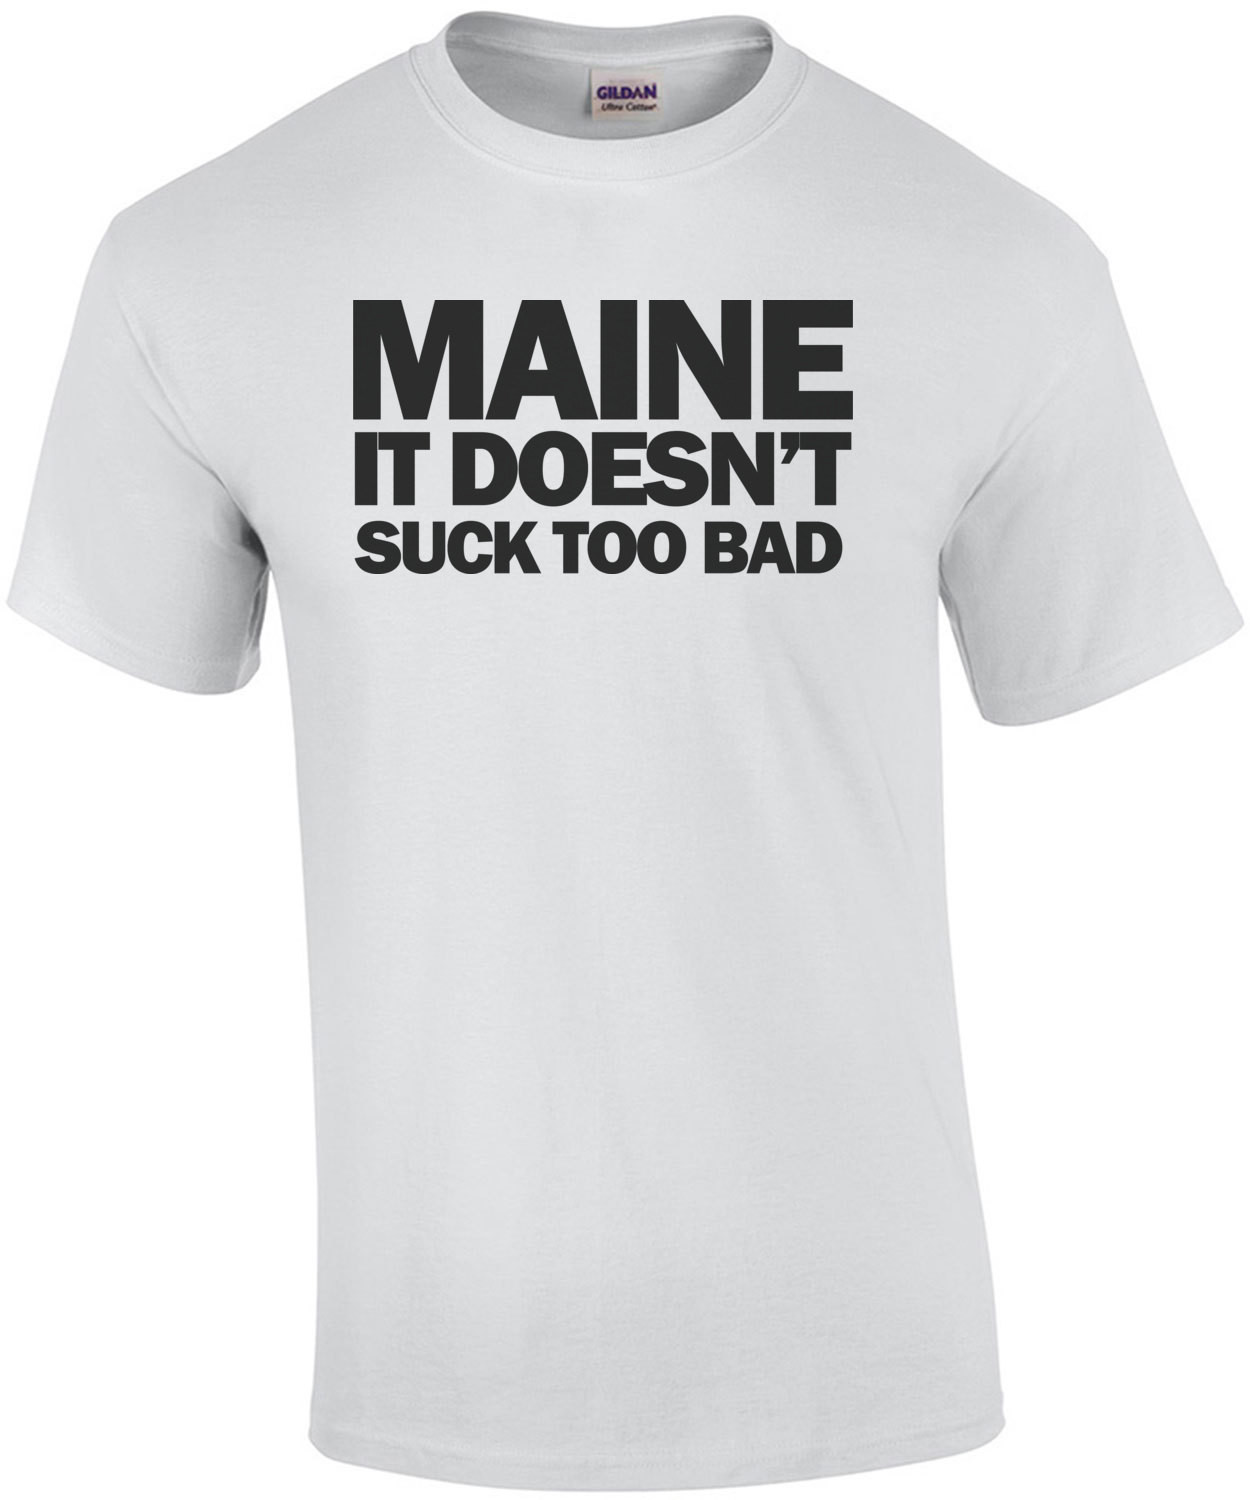 Maine it doesn't suck too bad - Maine T-Shirt